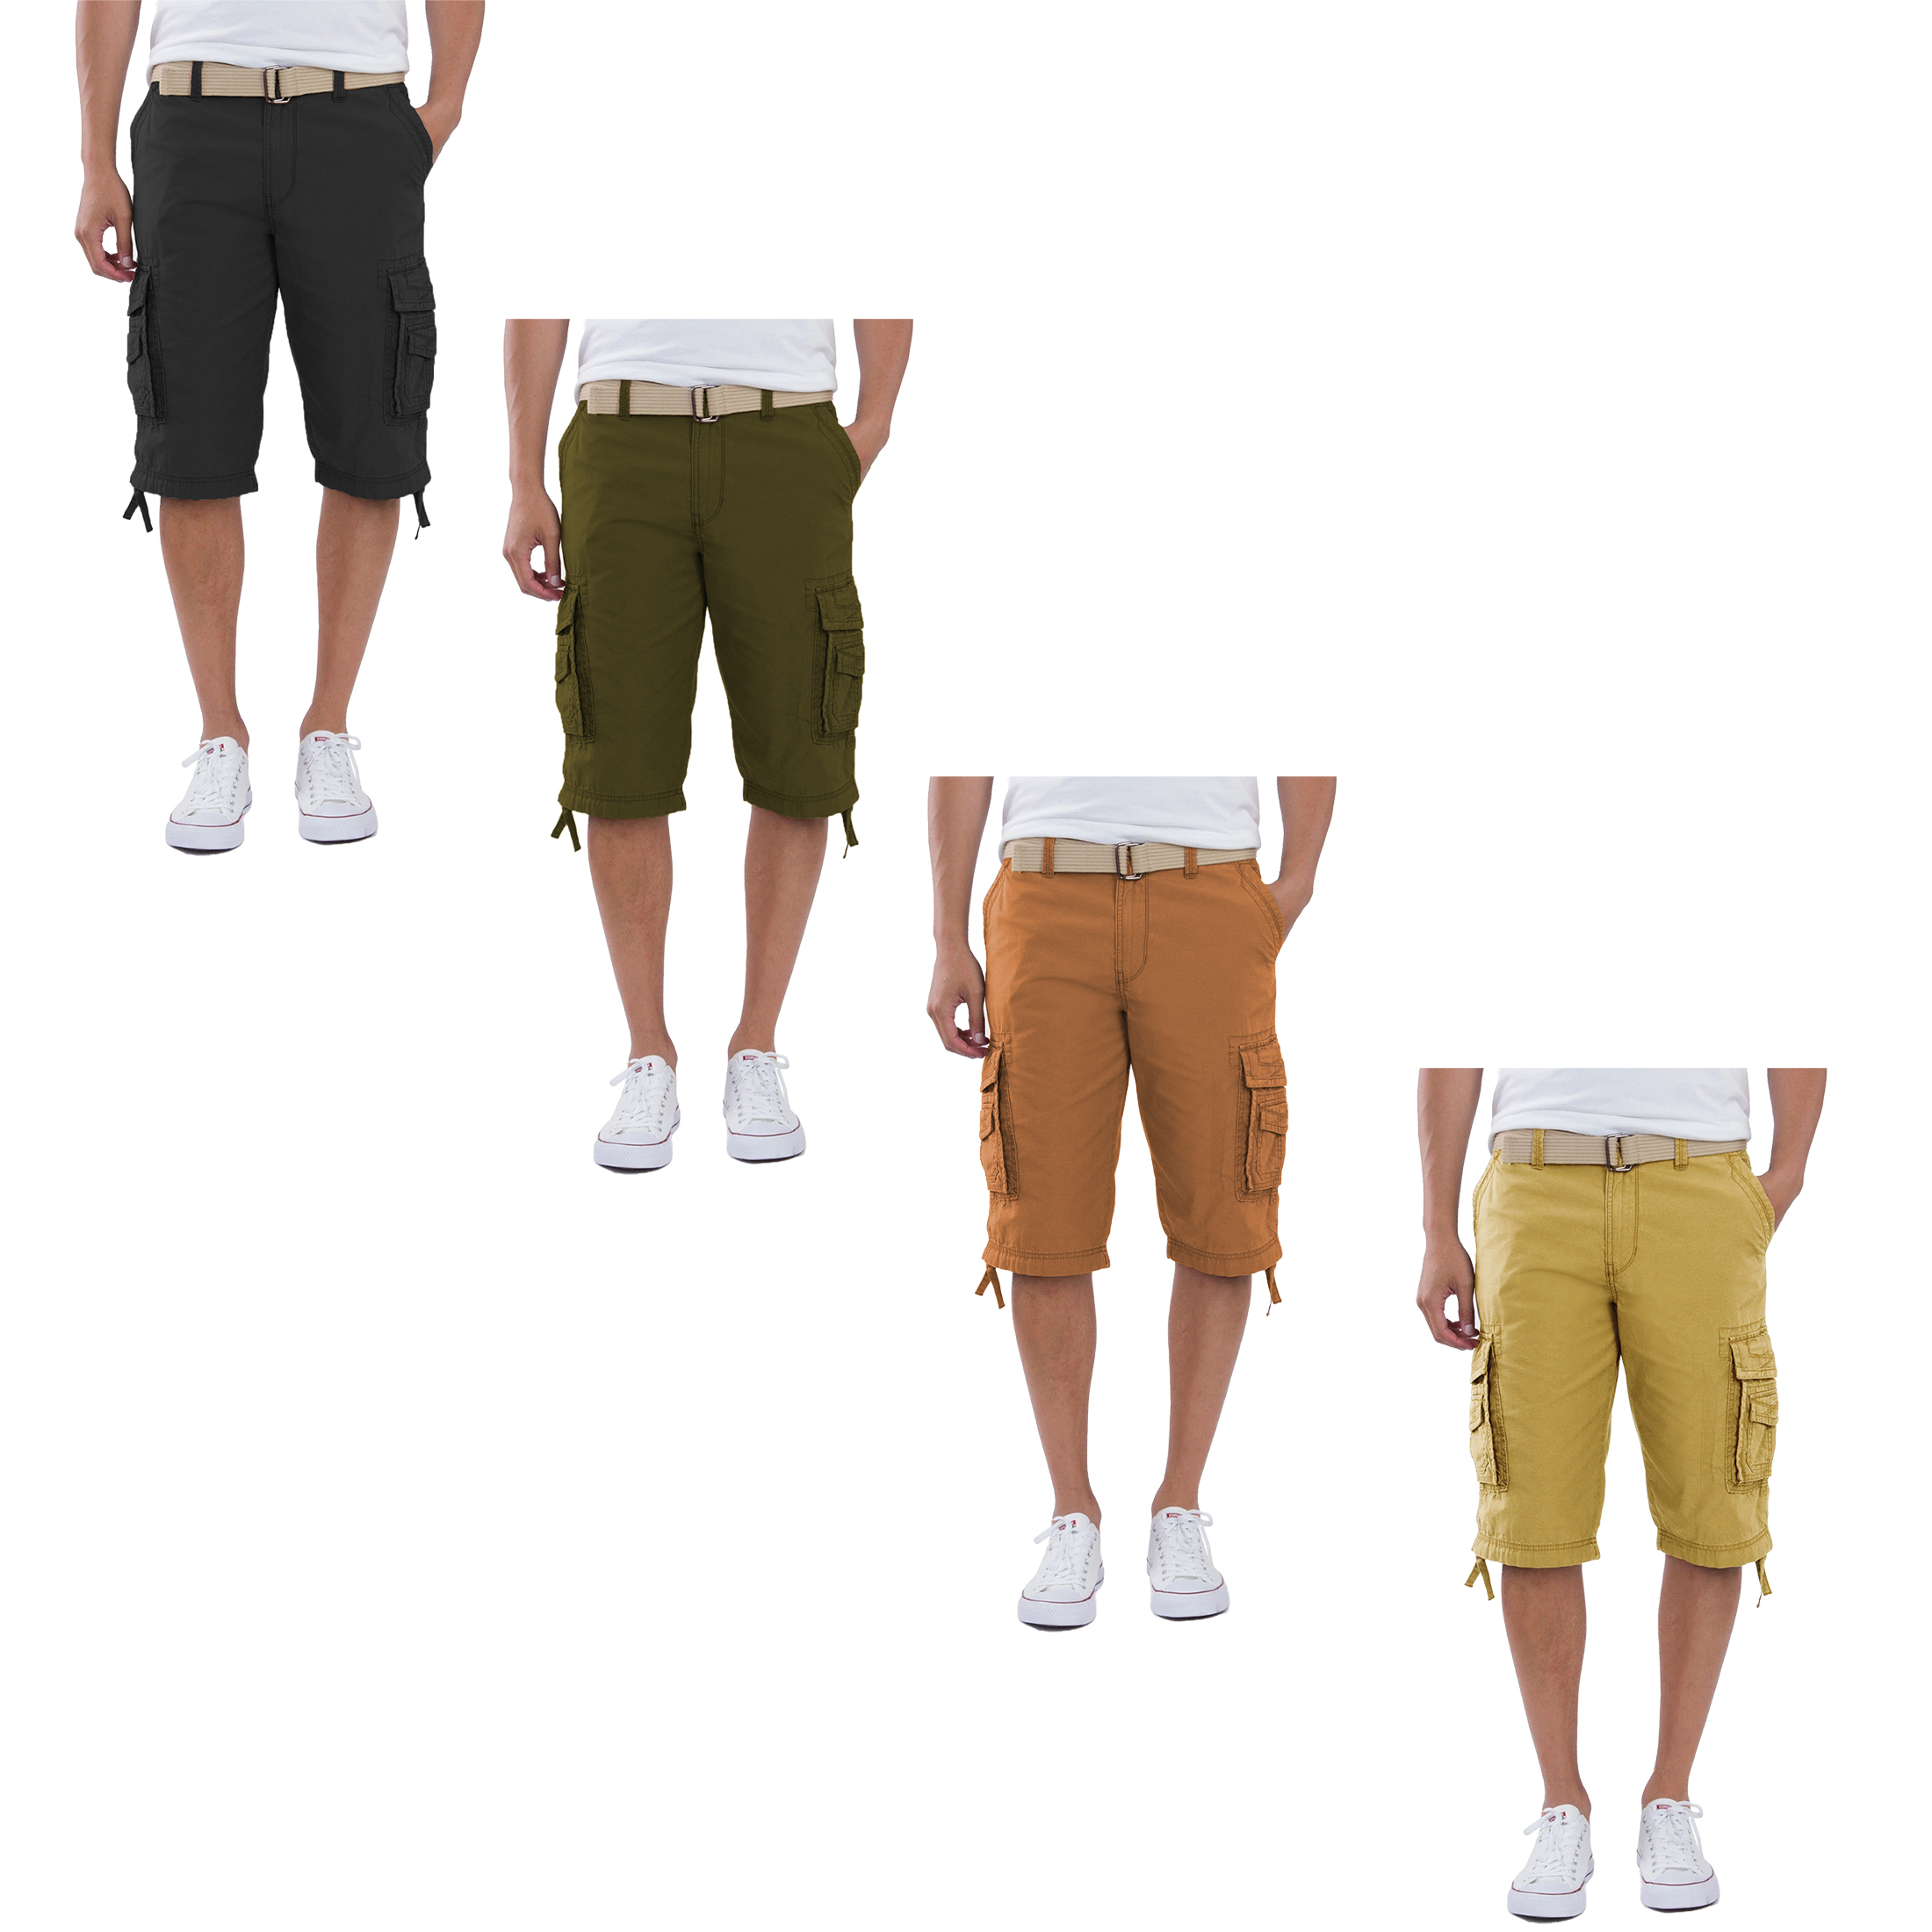 1-Pack Men's Cargo Utility Shorts With Belt Multi-Pocket Tactical Outdoor Shorts Adventure Work Hiking Casual Wear Solid Lightweight Shorts